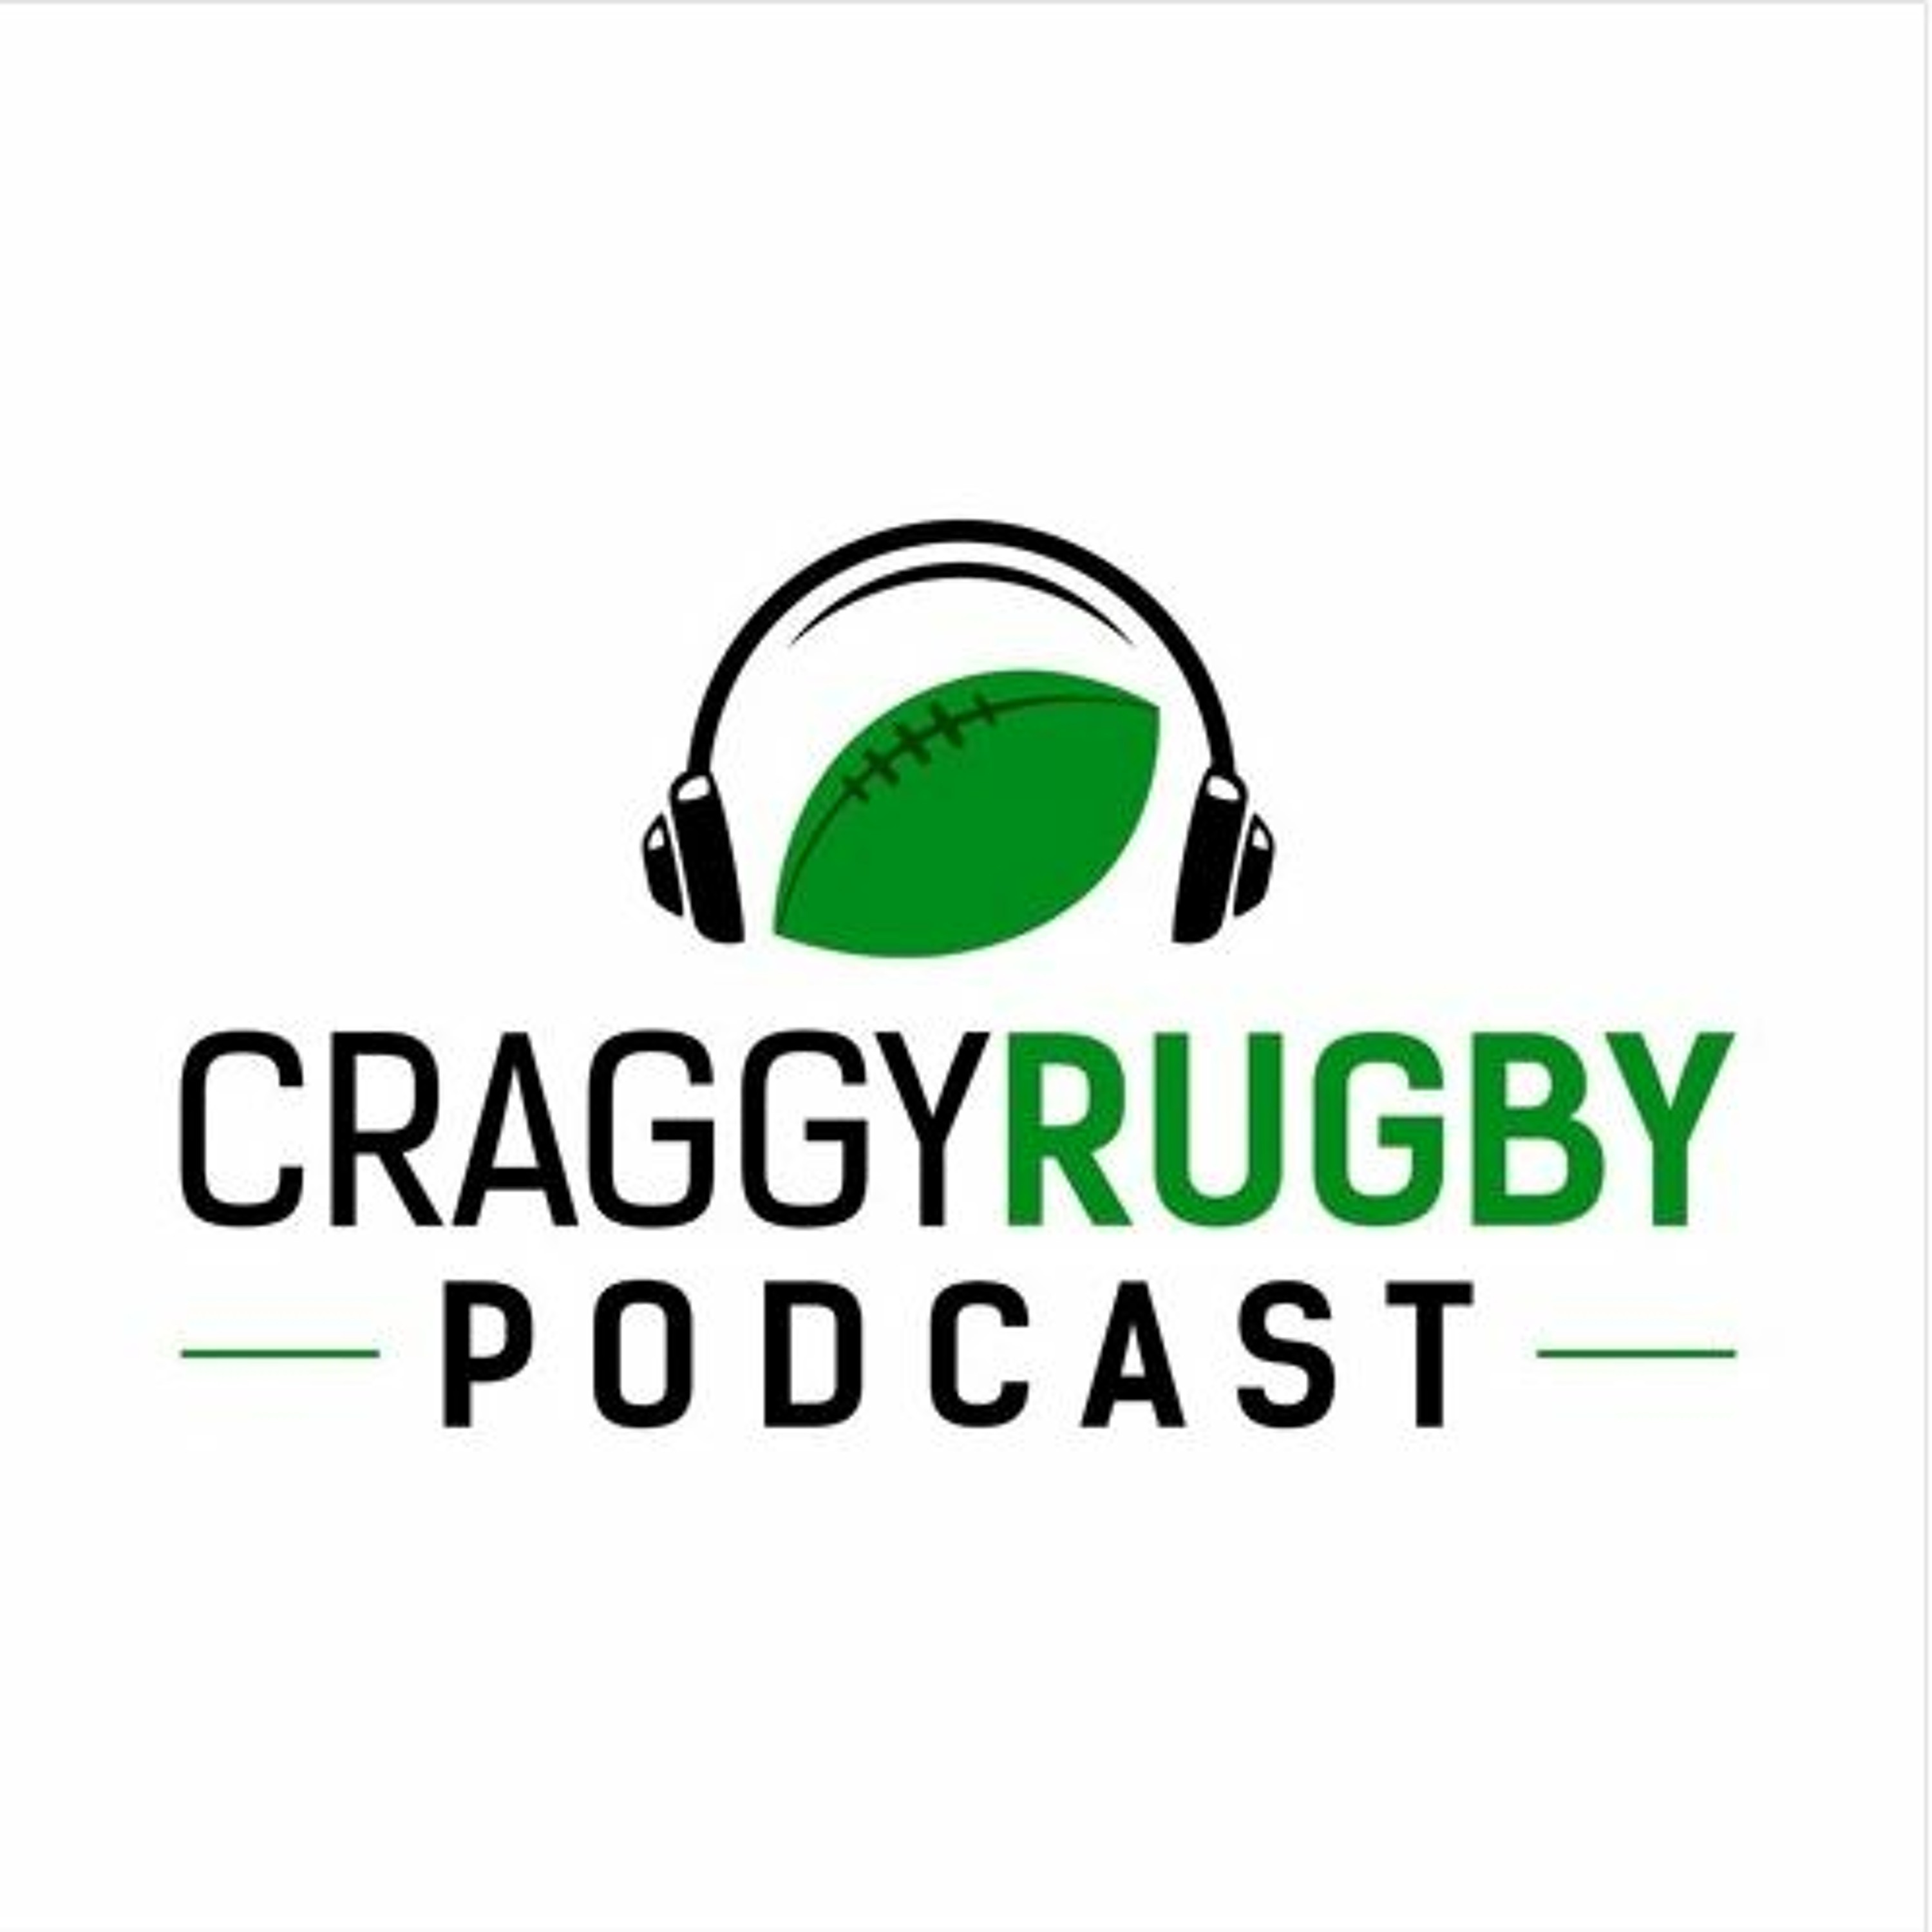 A Journey To La Rochelle - La Rochelle 20 Connacht 30 - Craggy Rugby podcast